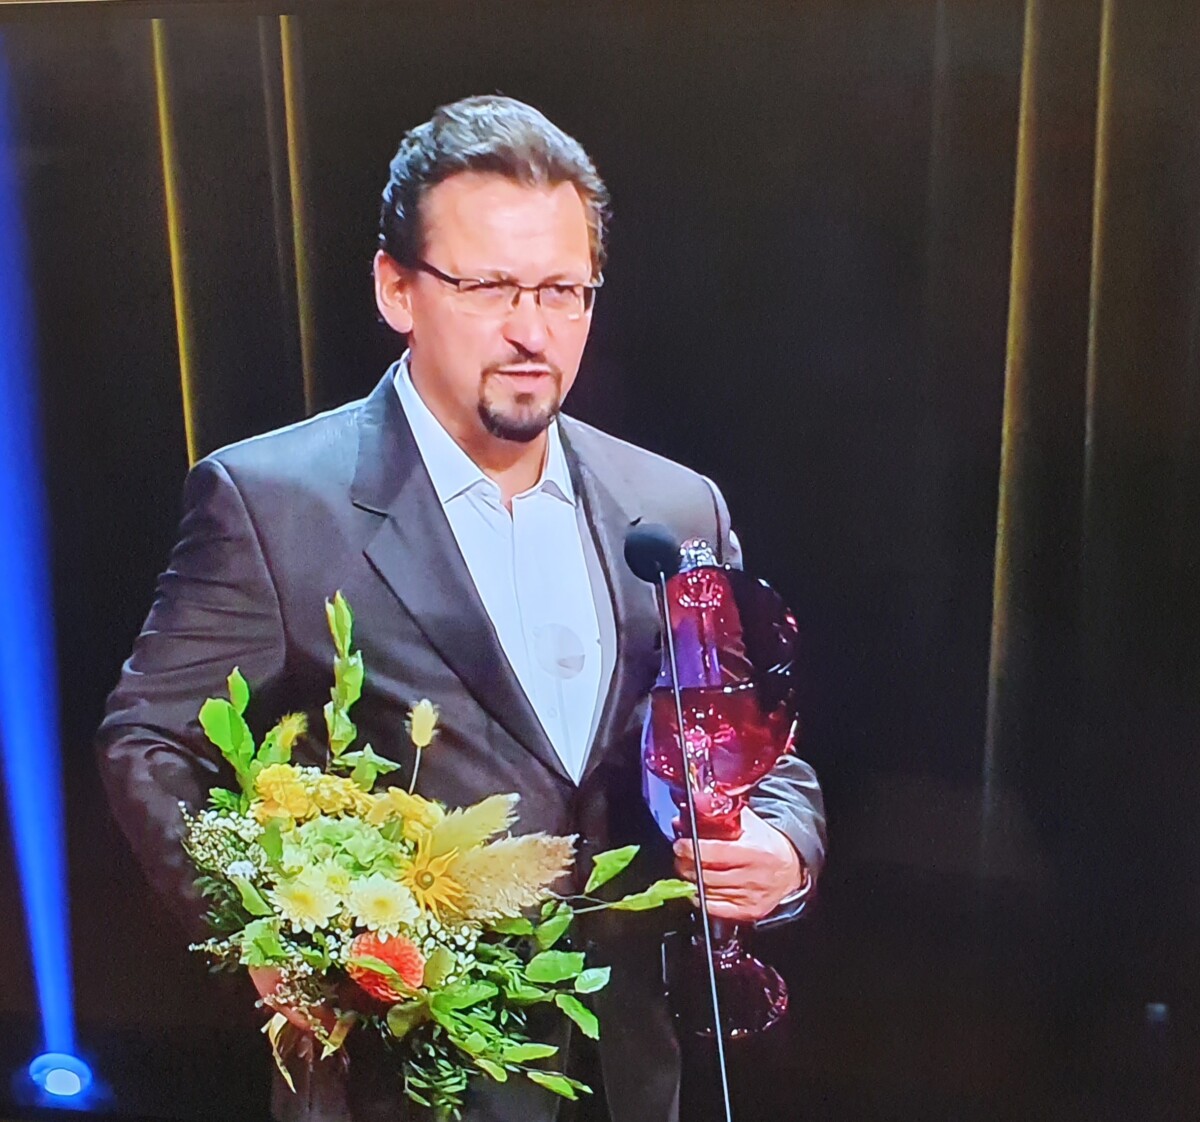 Martin Bárta is the winner of the Award in the category Opera – Male performance